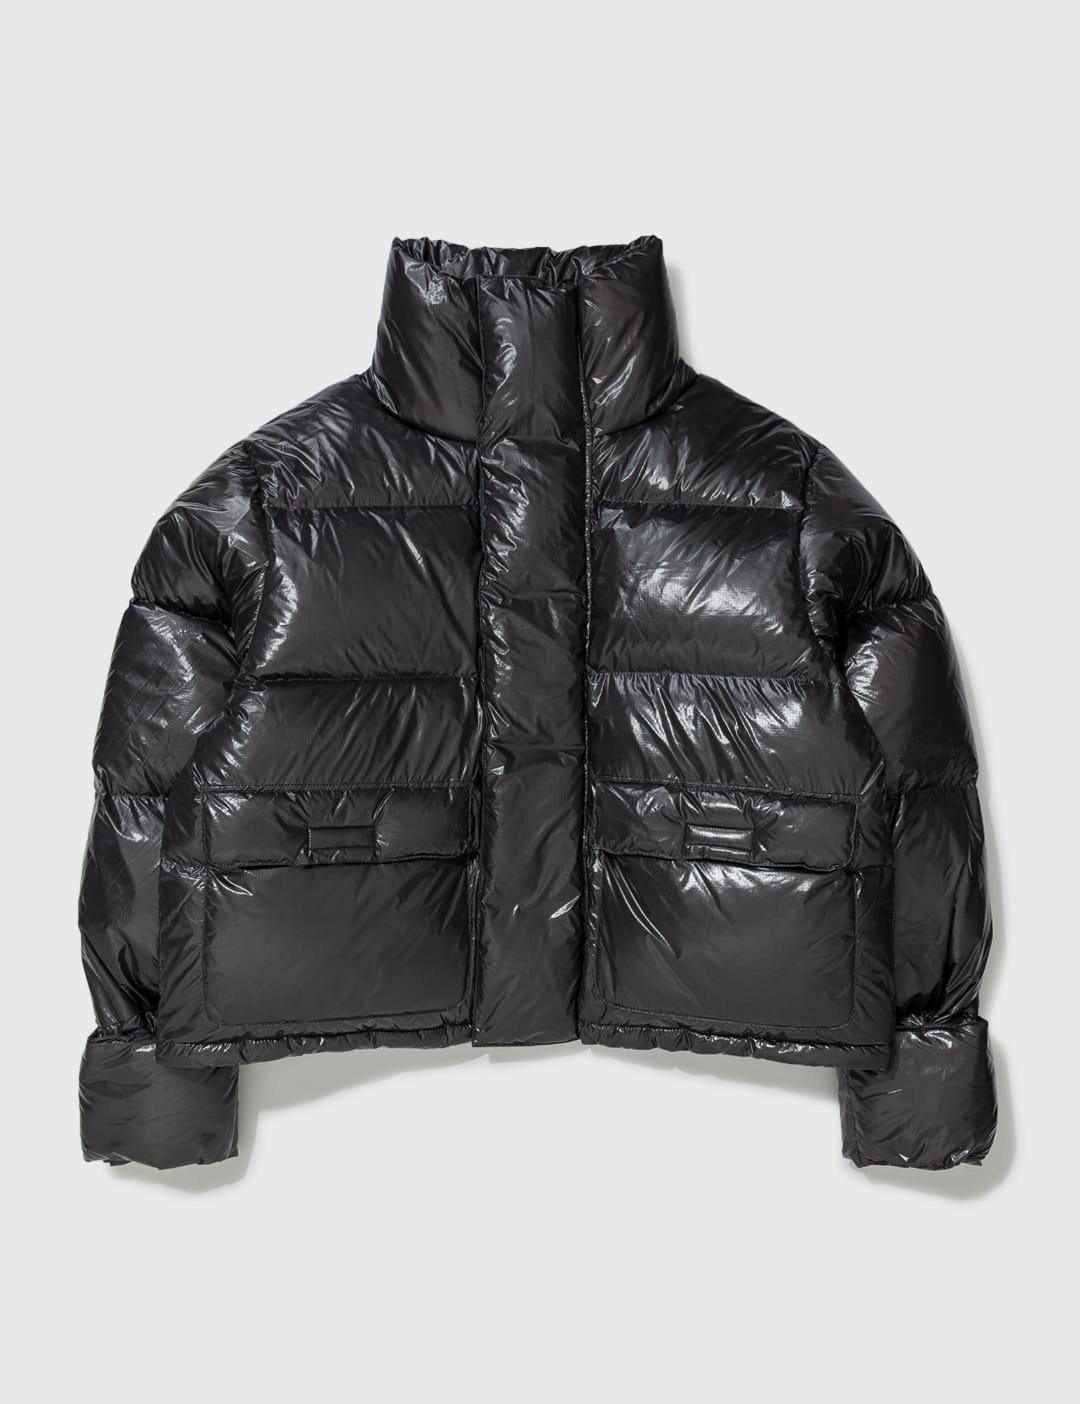 Comfy Outdoor Garment - OVERLAY JACKET | HBX - Globally Curated 